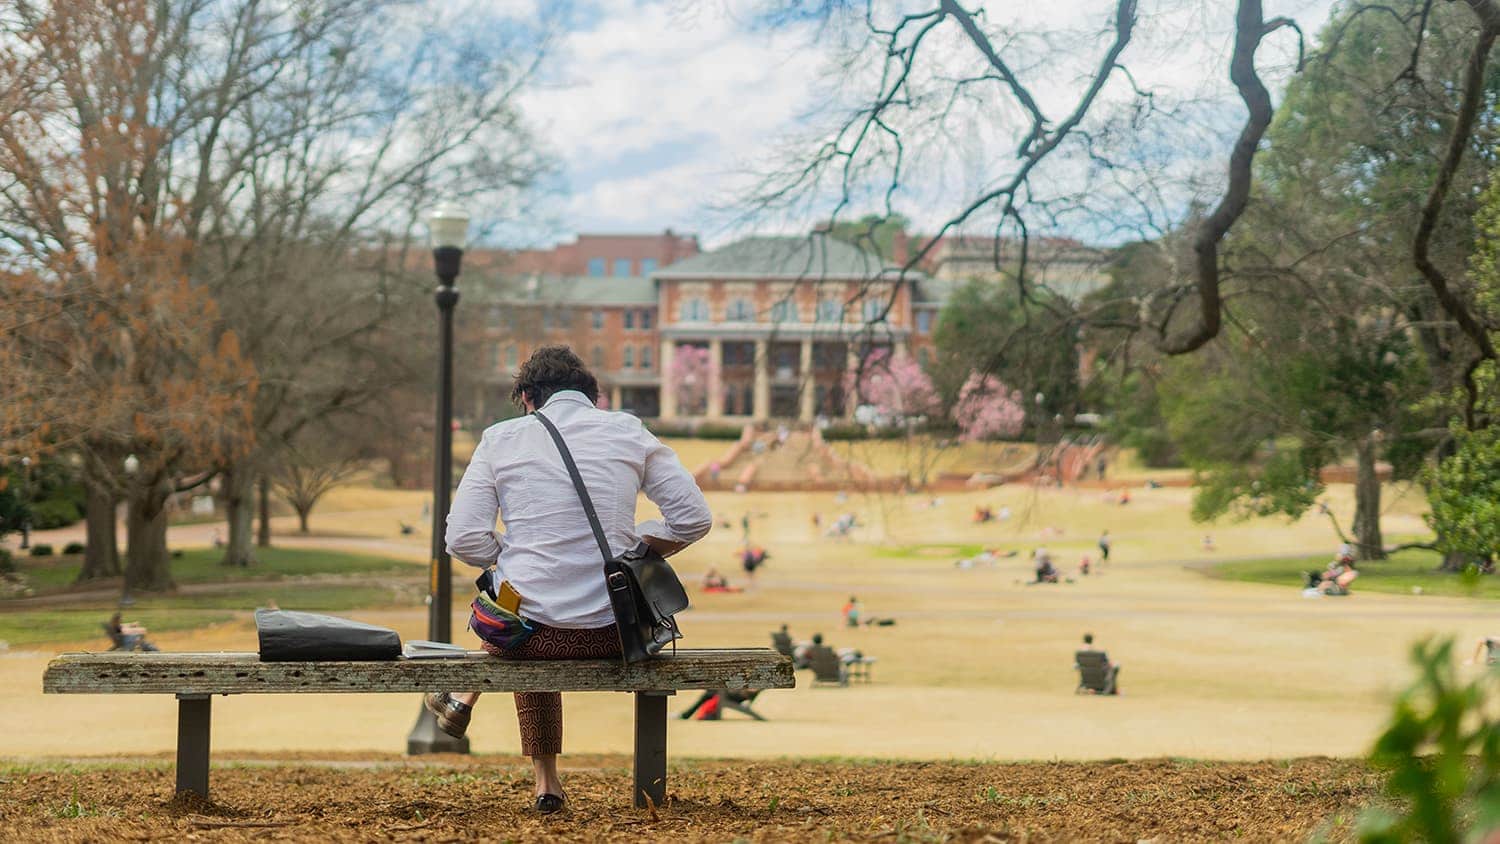 A person sits on a bench near the Court of North Carolina in spring.